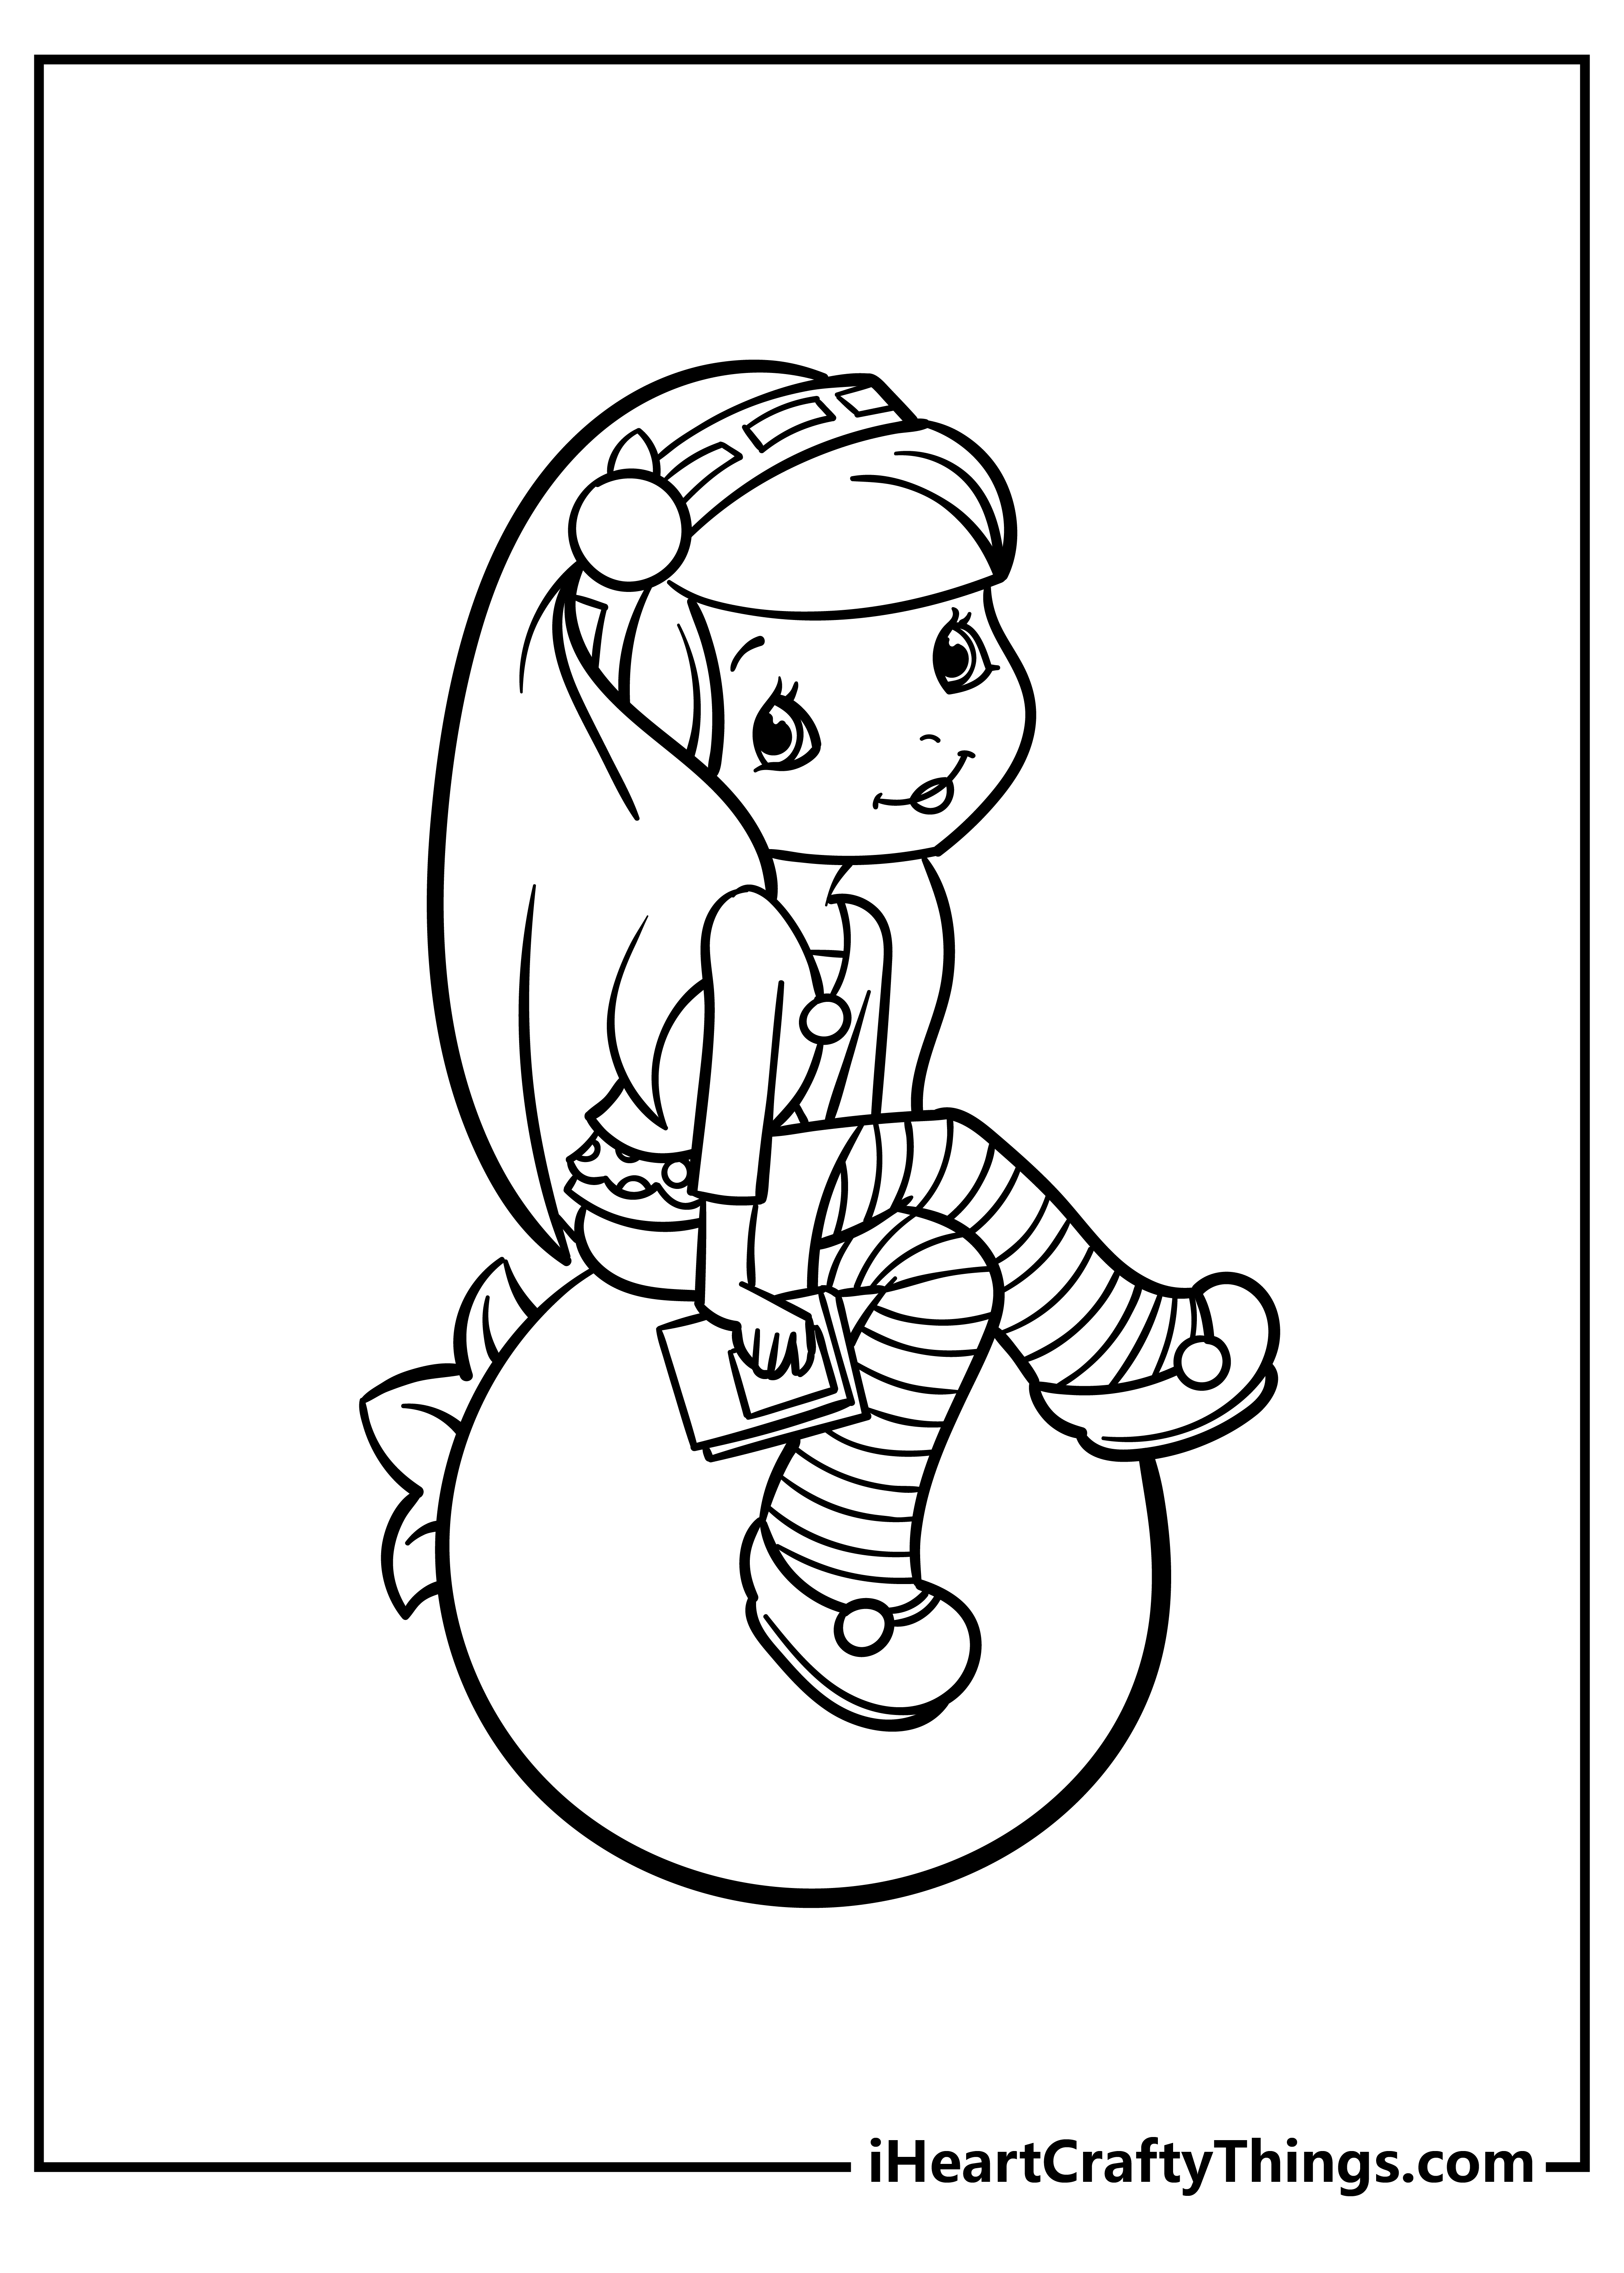 Strawberry Shortcake Coloring Pages for adults free printable